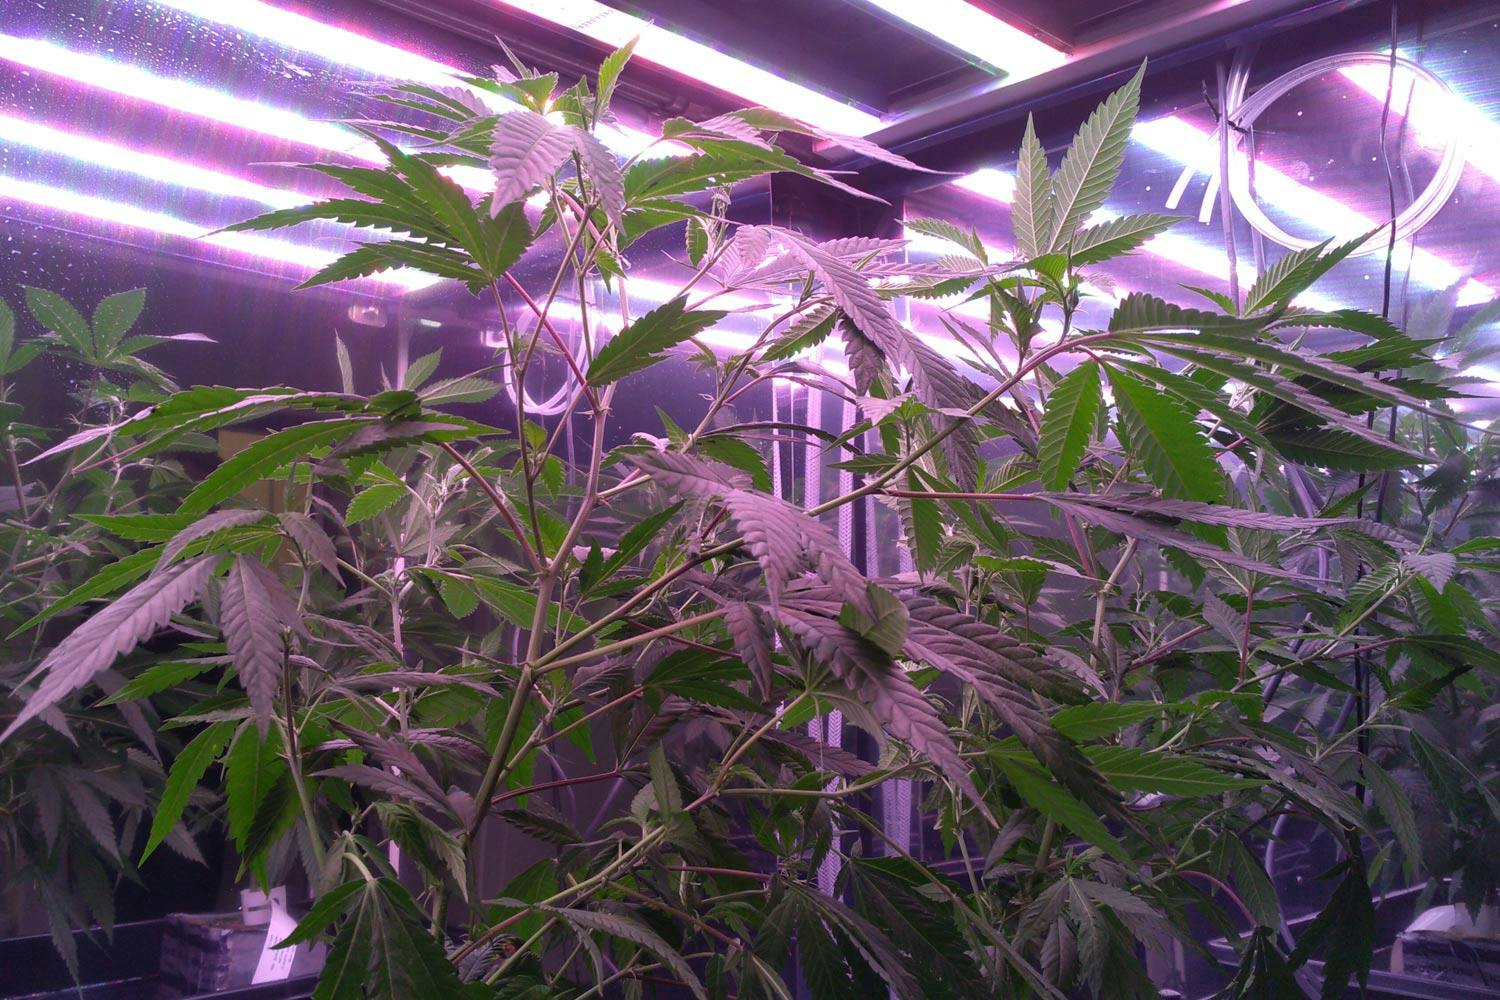 A cannabis plant with slender branches and long, thin, green, serrated leaves grows in a glass box lit with purple lights.